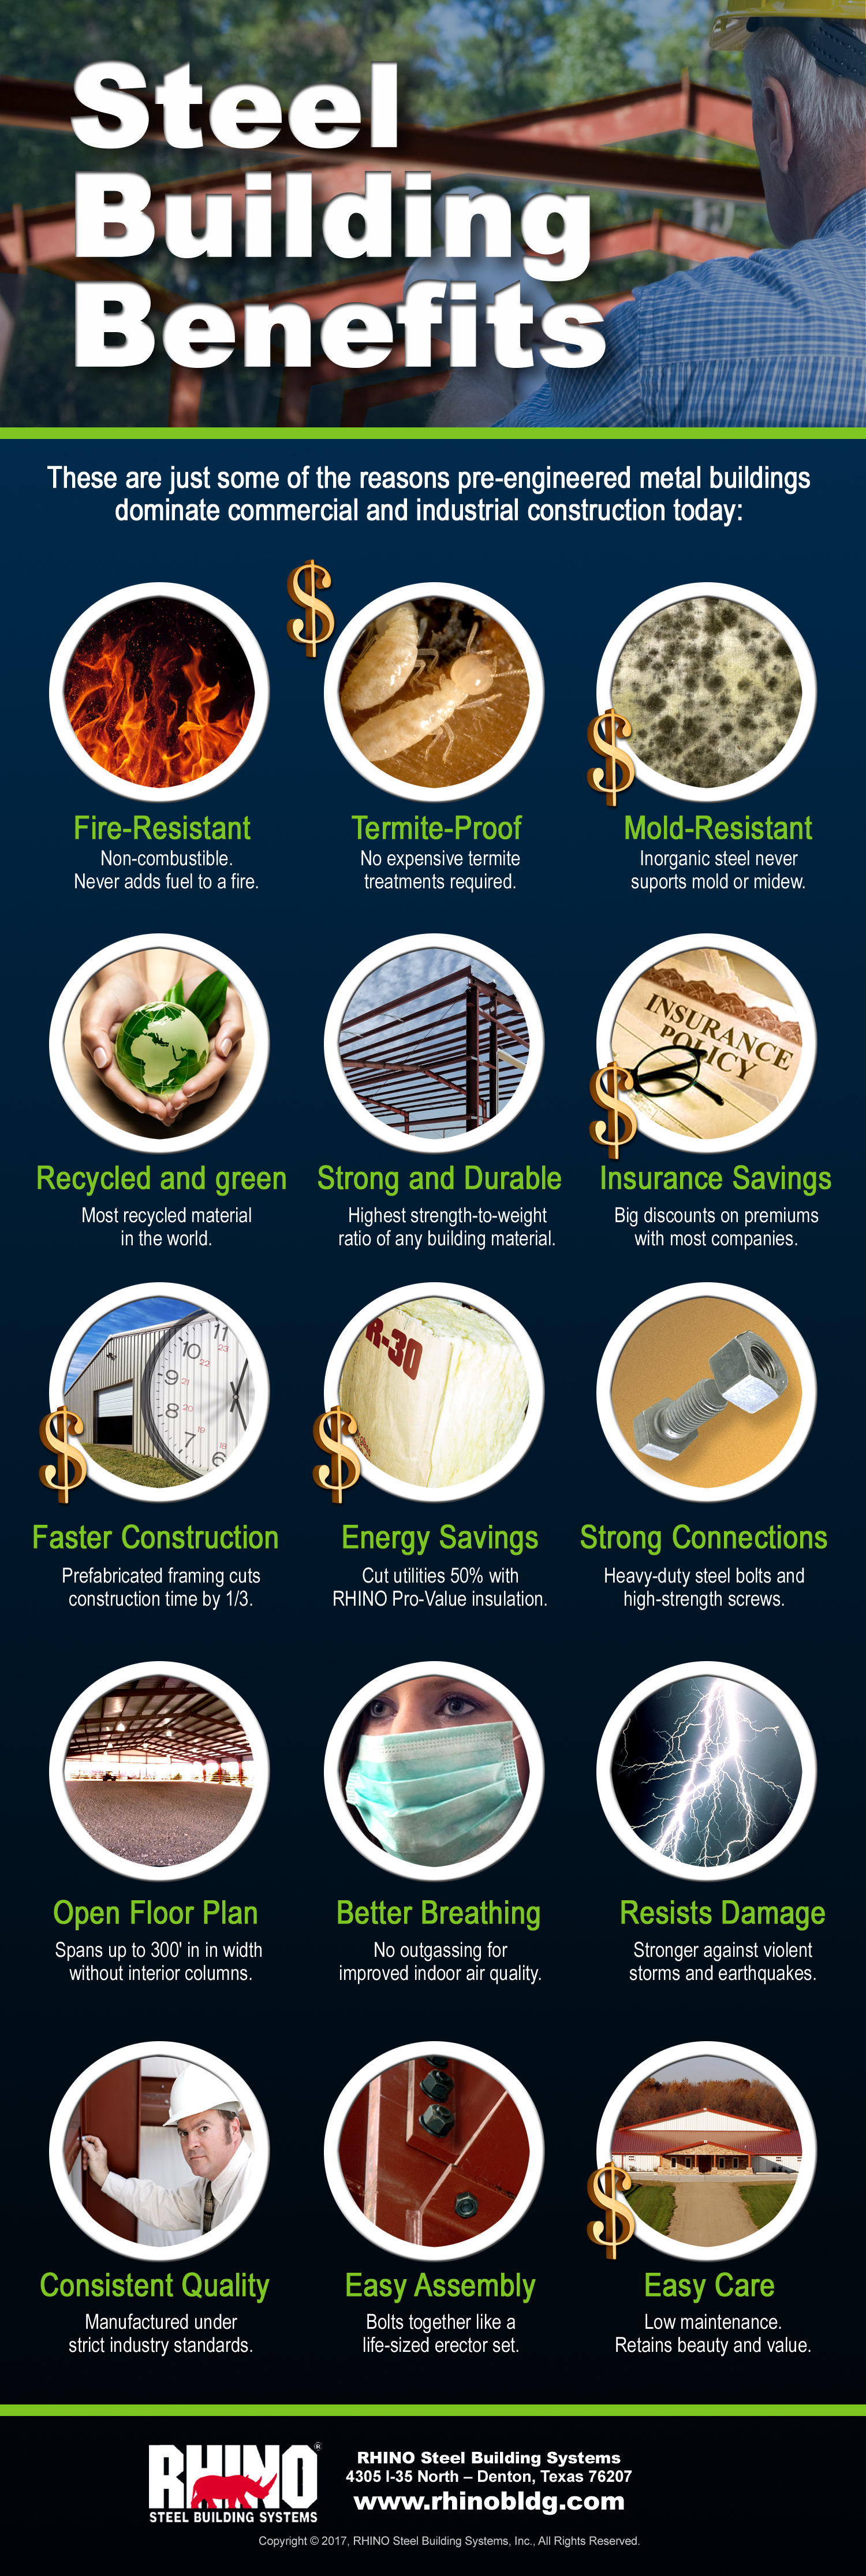 RHINO infographic showing 15 benefits of building steel structures.